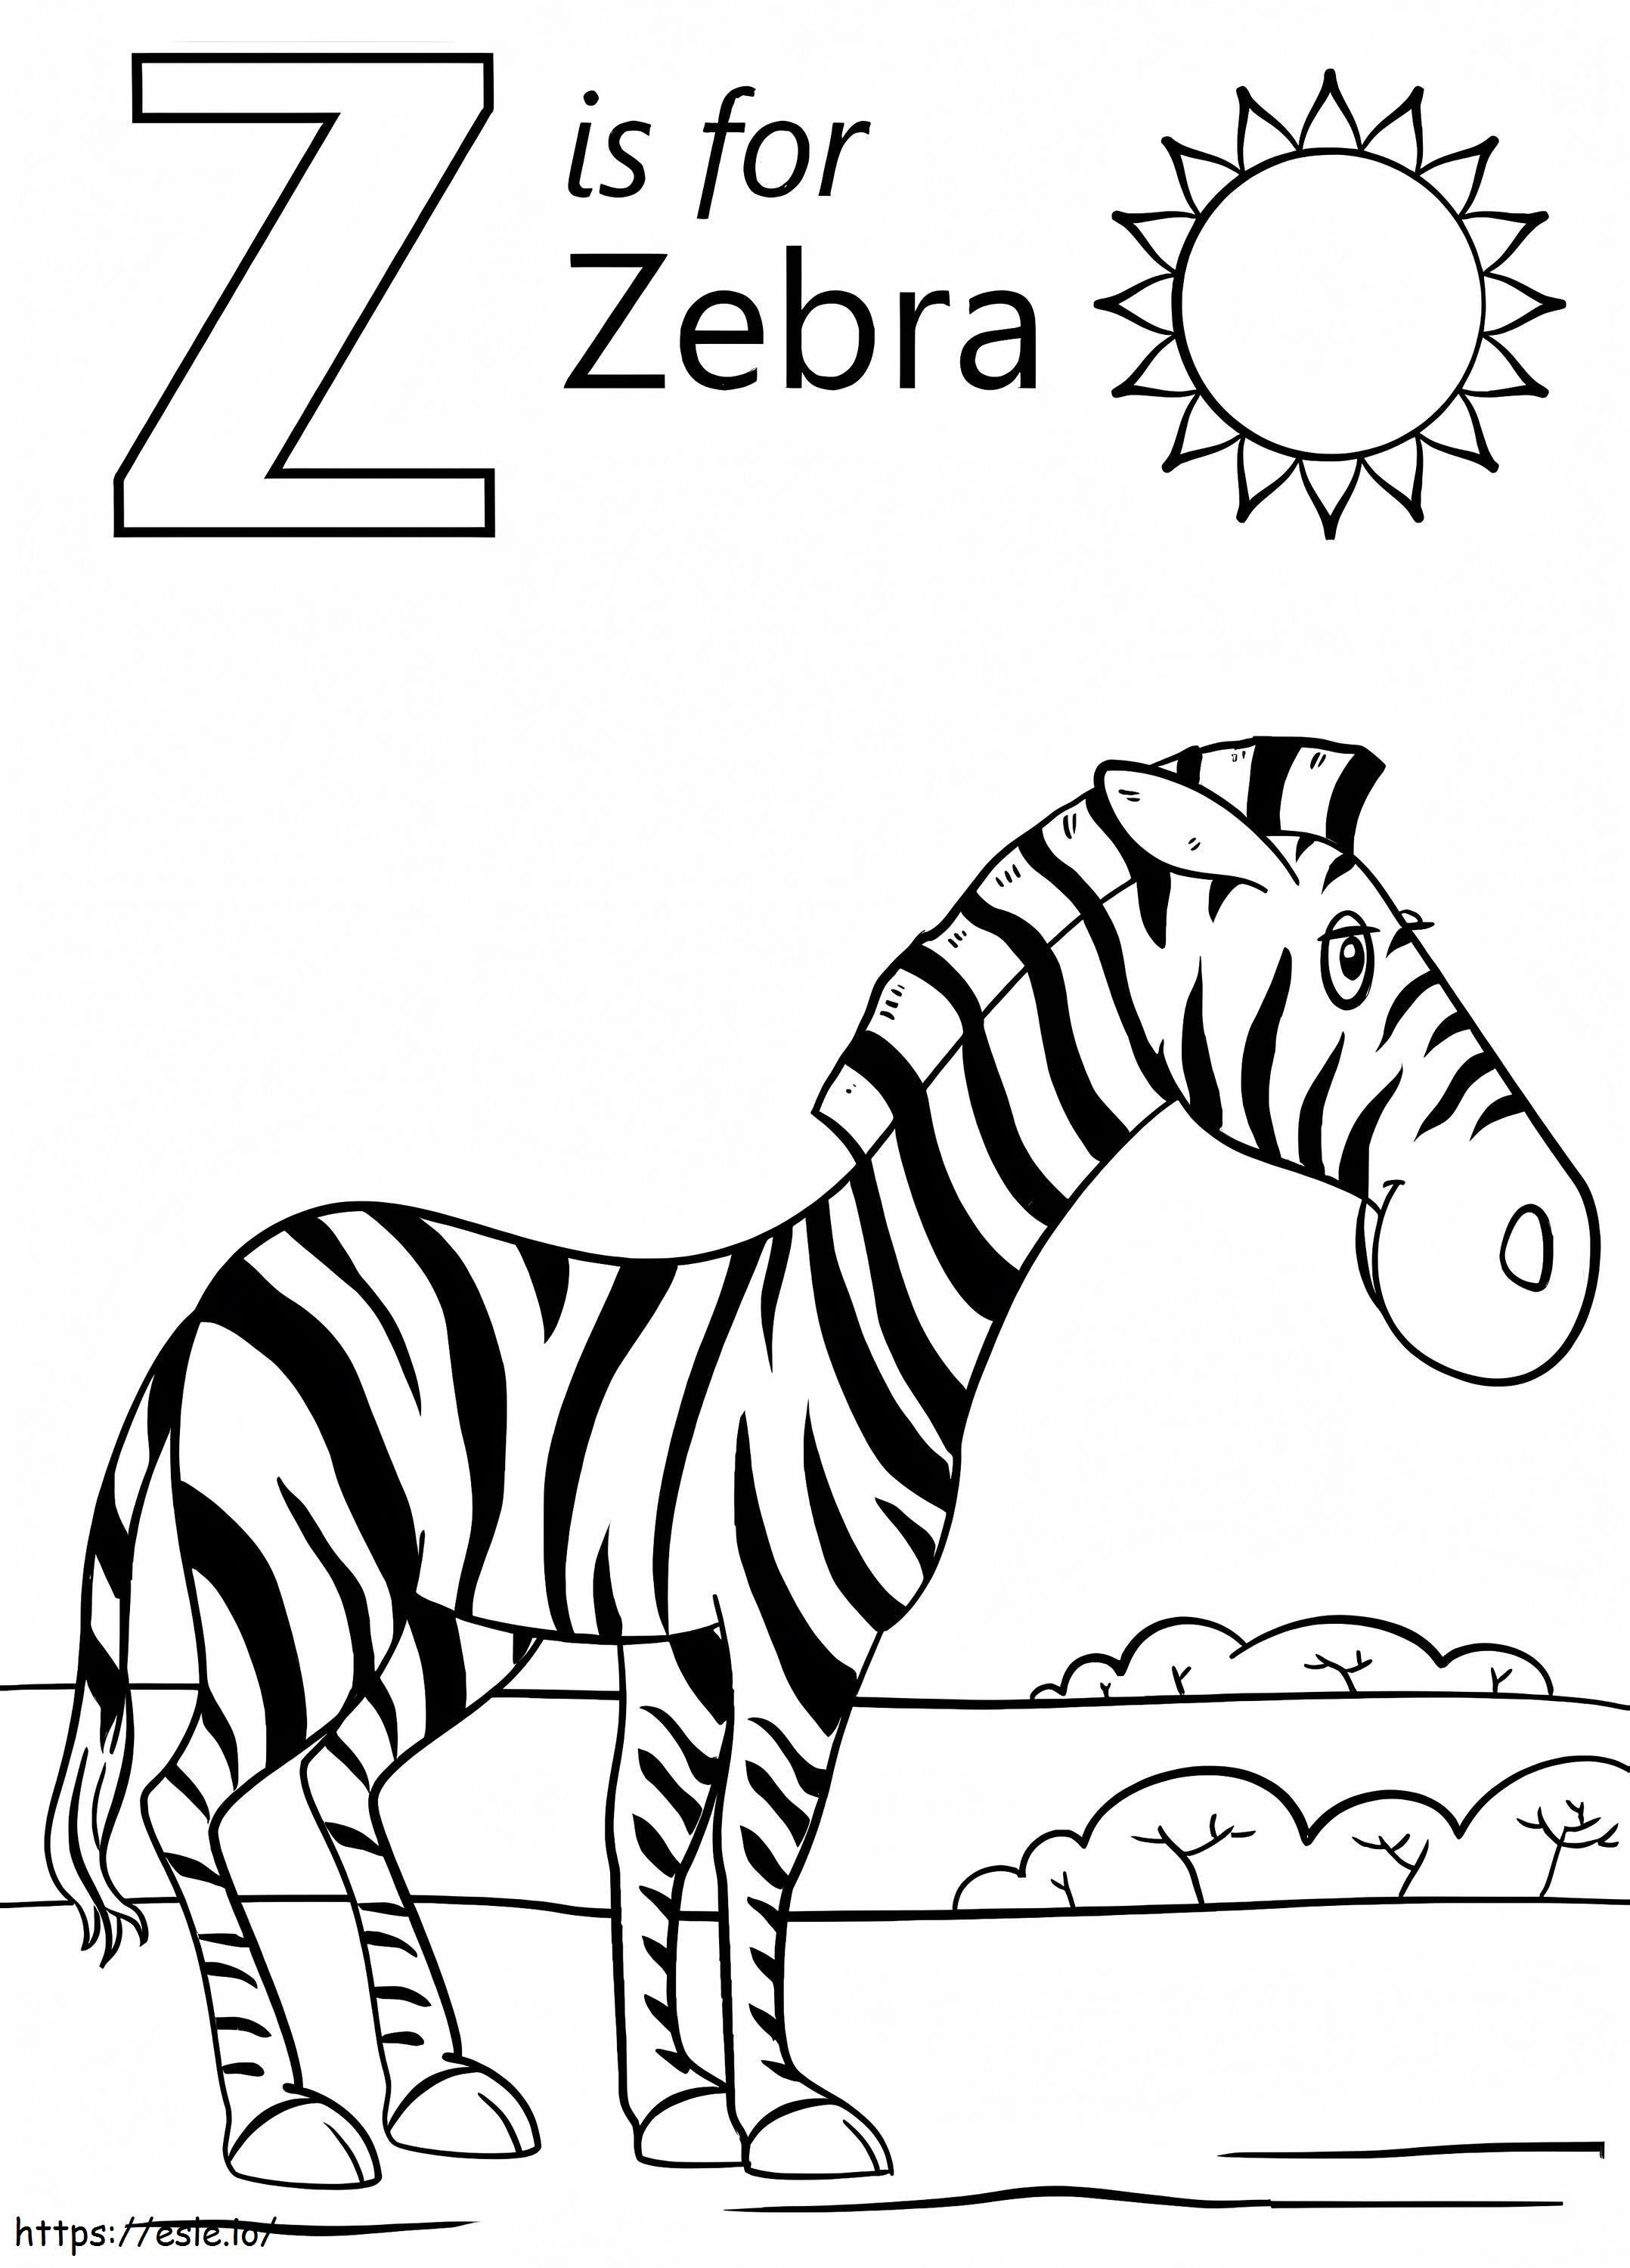 Zebra Letter Z With Sun coloring page